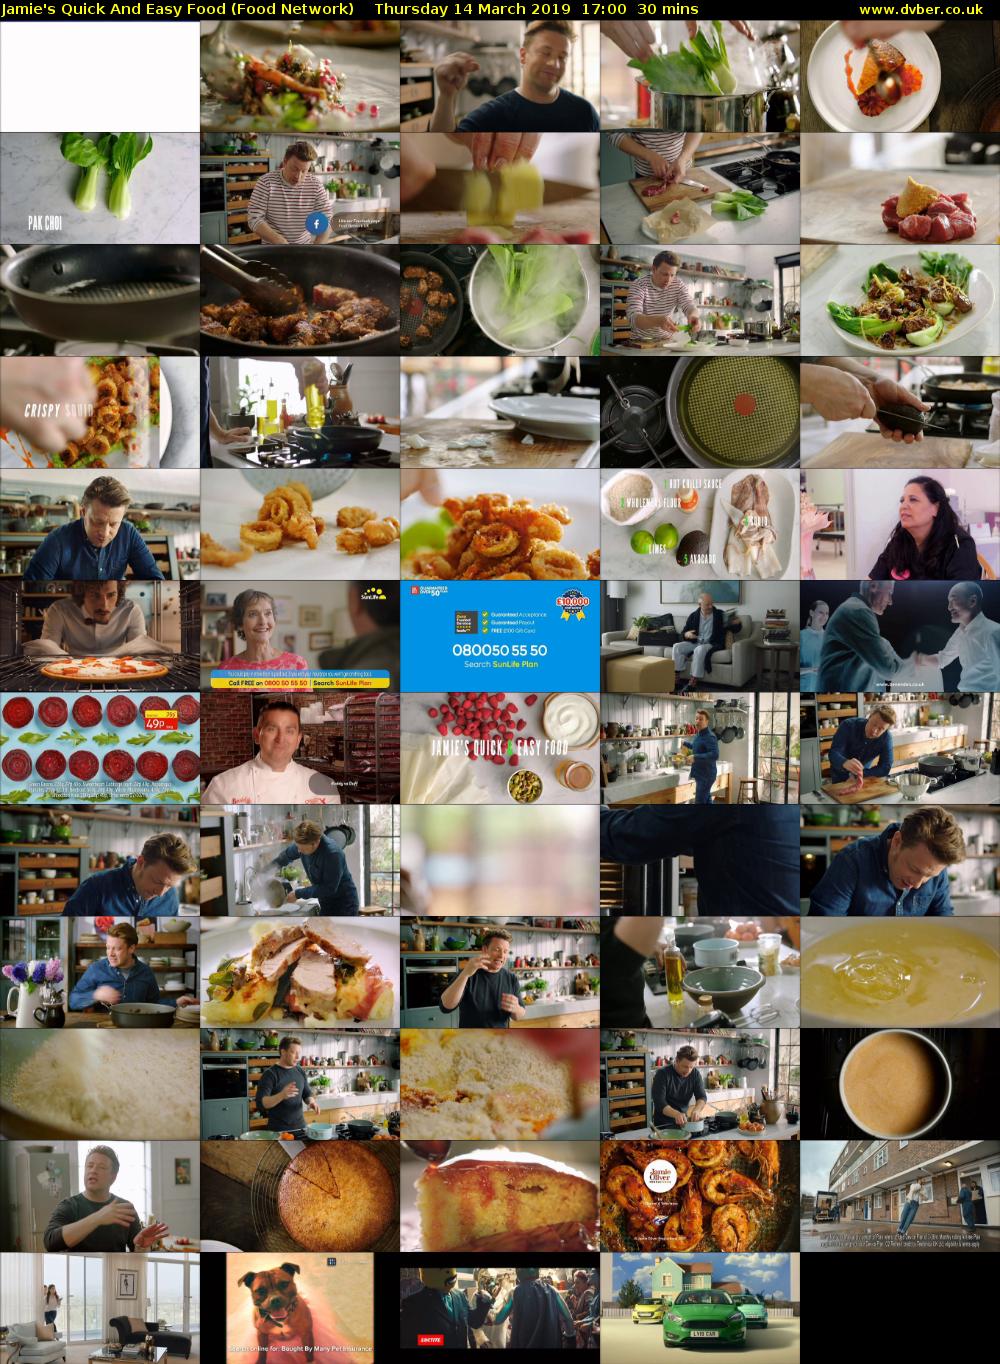 Jamie's Quick And Easy Food (Food Network) Thursday 14 March 2019 17:00 - 17:30